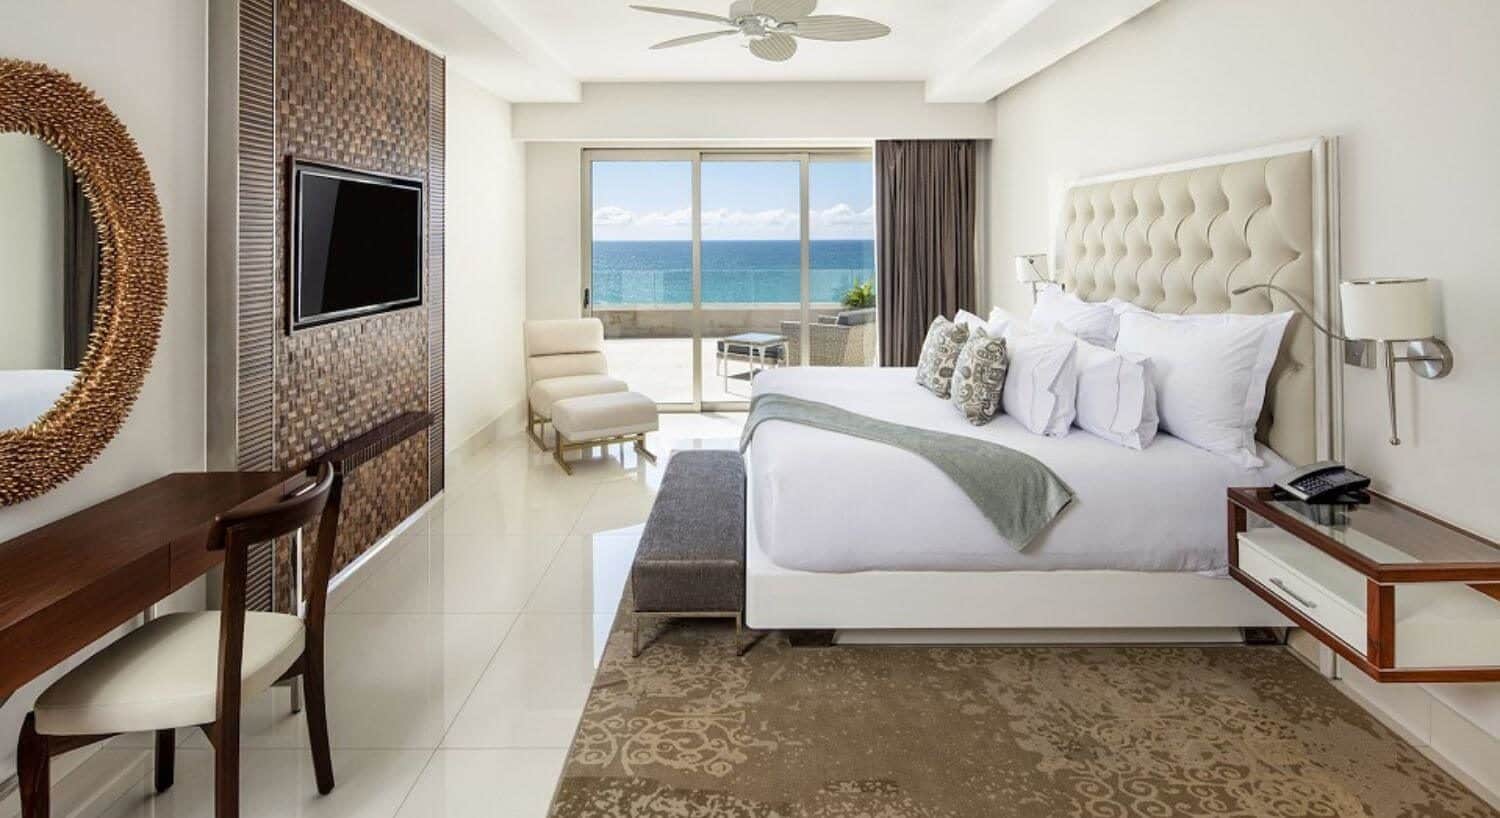 A bedroom with a King bed, a plush headboard, a sitting bench at the foot of the bed, a flat screen TV and writing desk and chair on the opposite wall, a chaise lounge chair in the corner, and sliding doors that lead out to a private balcony with patio furniture and ocean views.